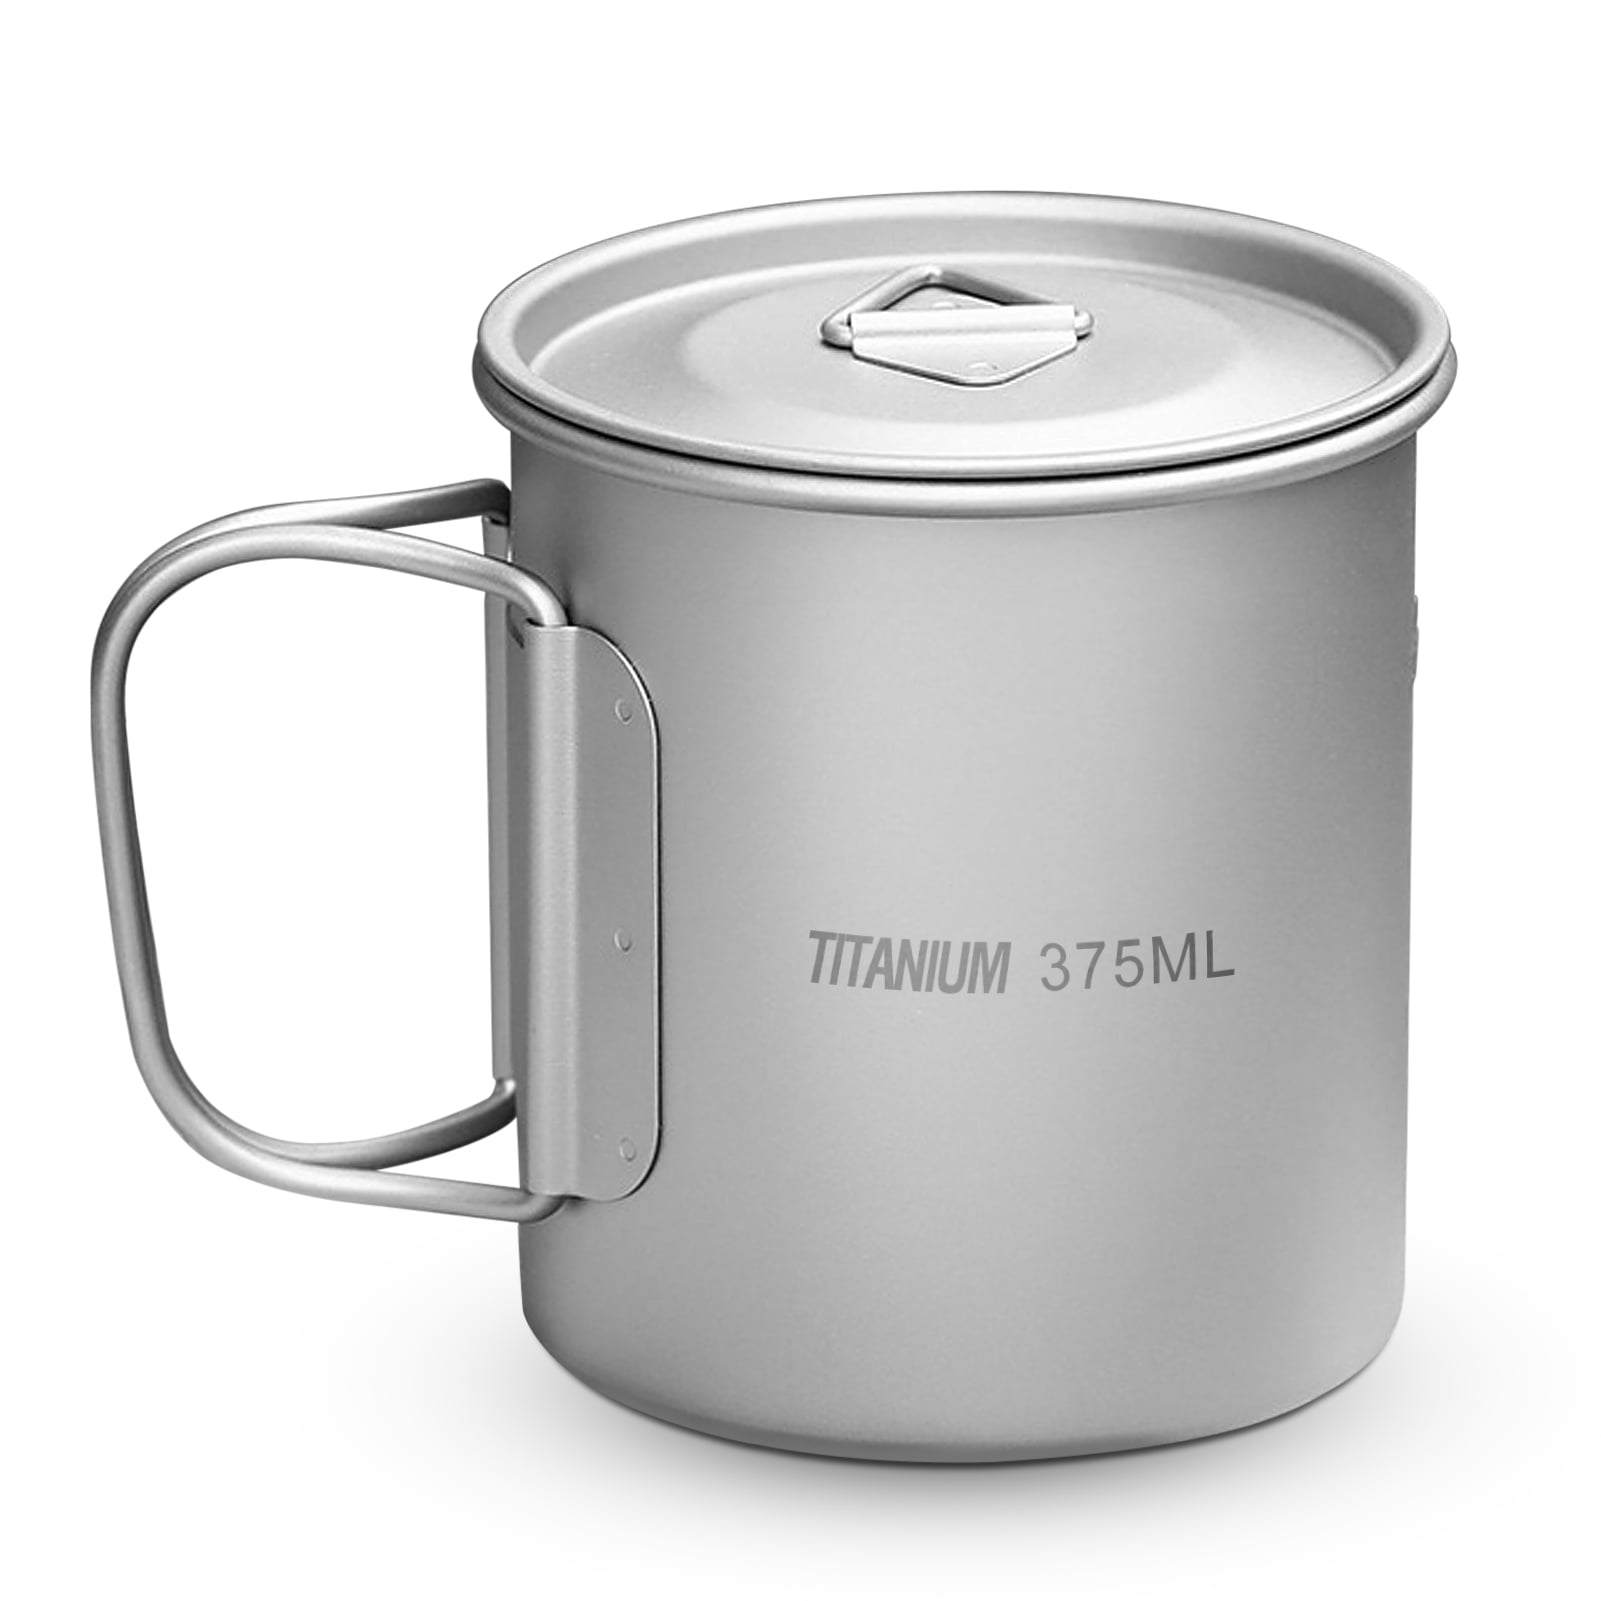 Details about   Portable Outdoor Stainless Steel Camping Mug Water Cup with Foldable Handle P6R6 